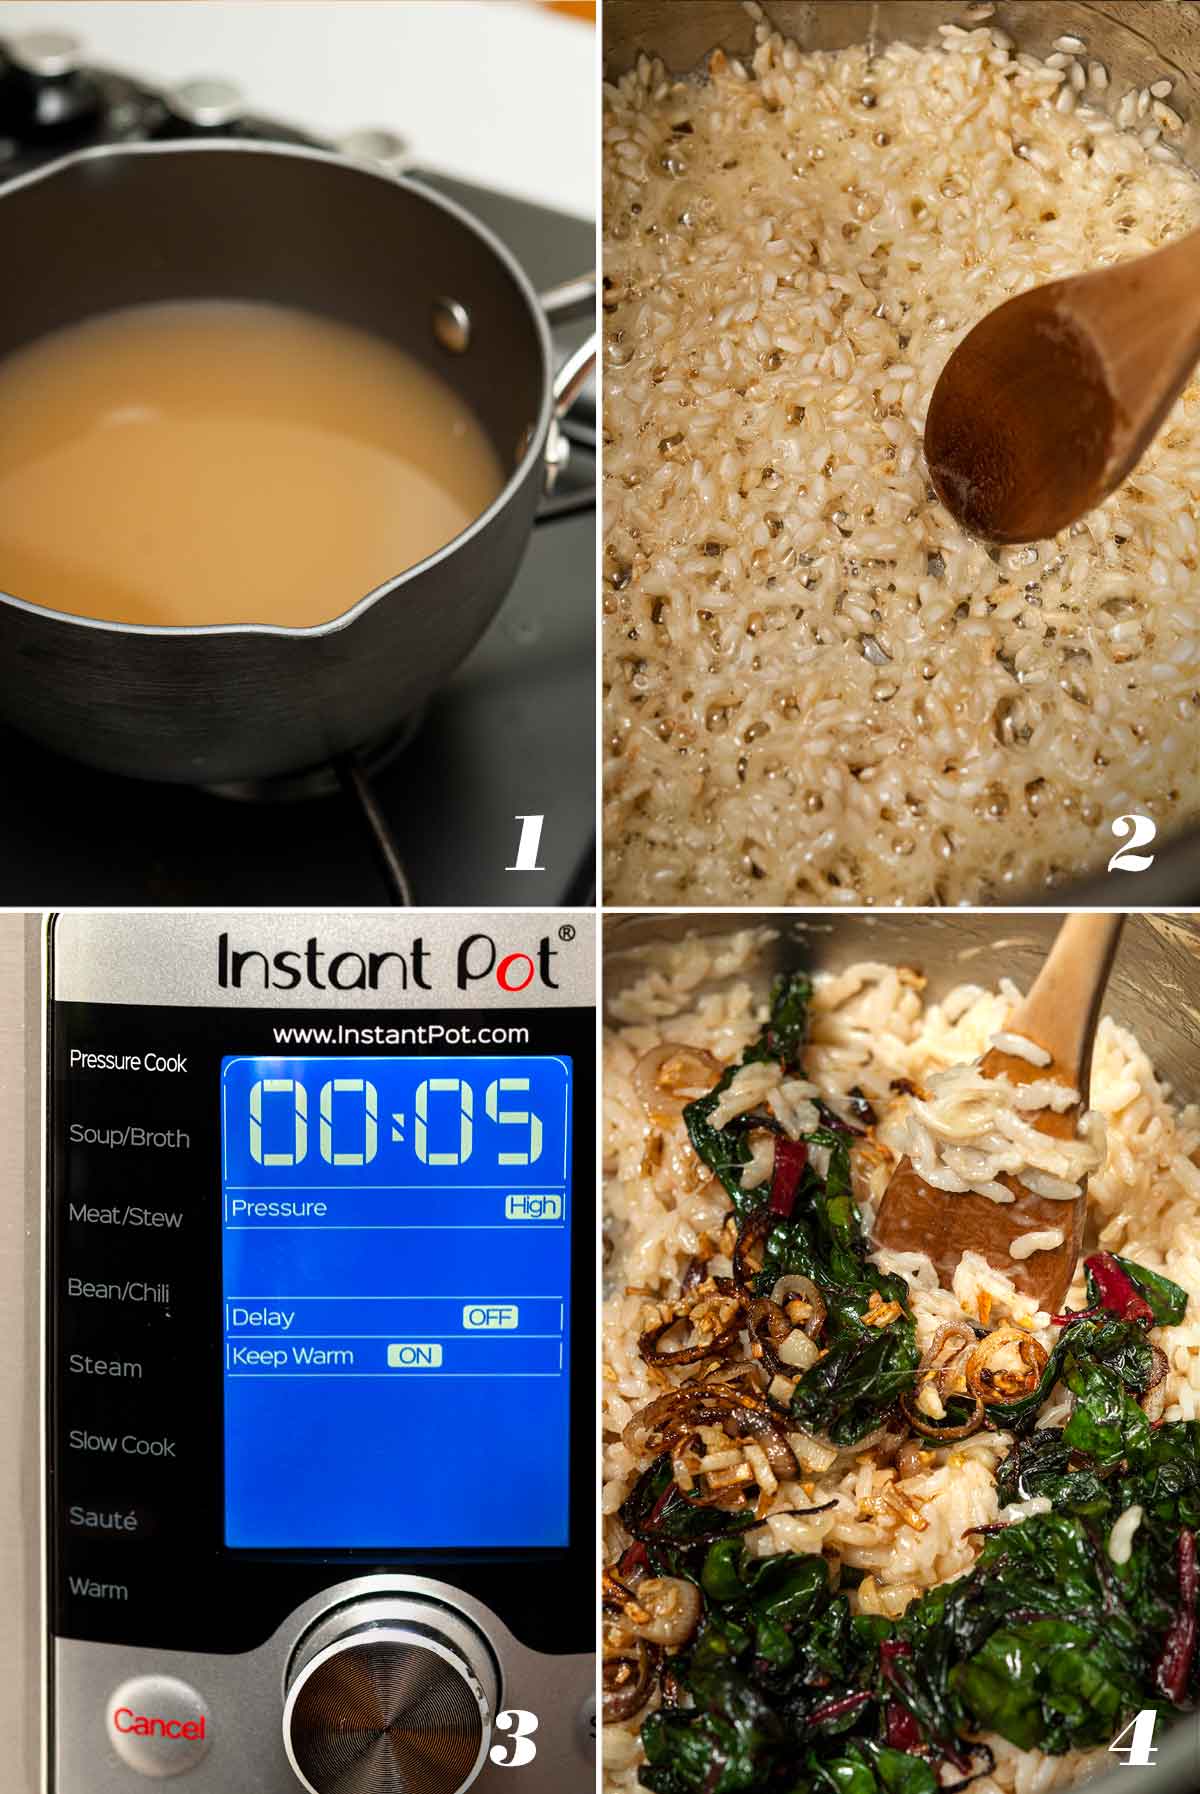 A collage of 4 numbered images showing how to make Instant Pot risotto.